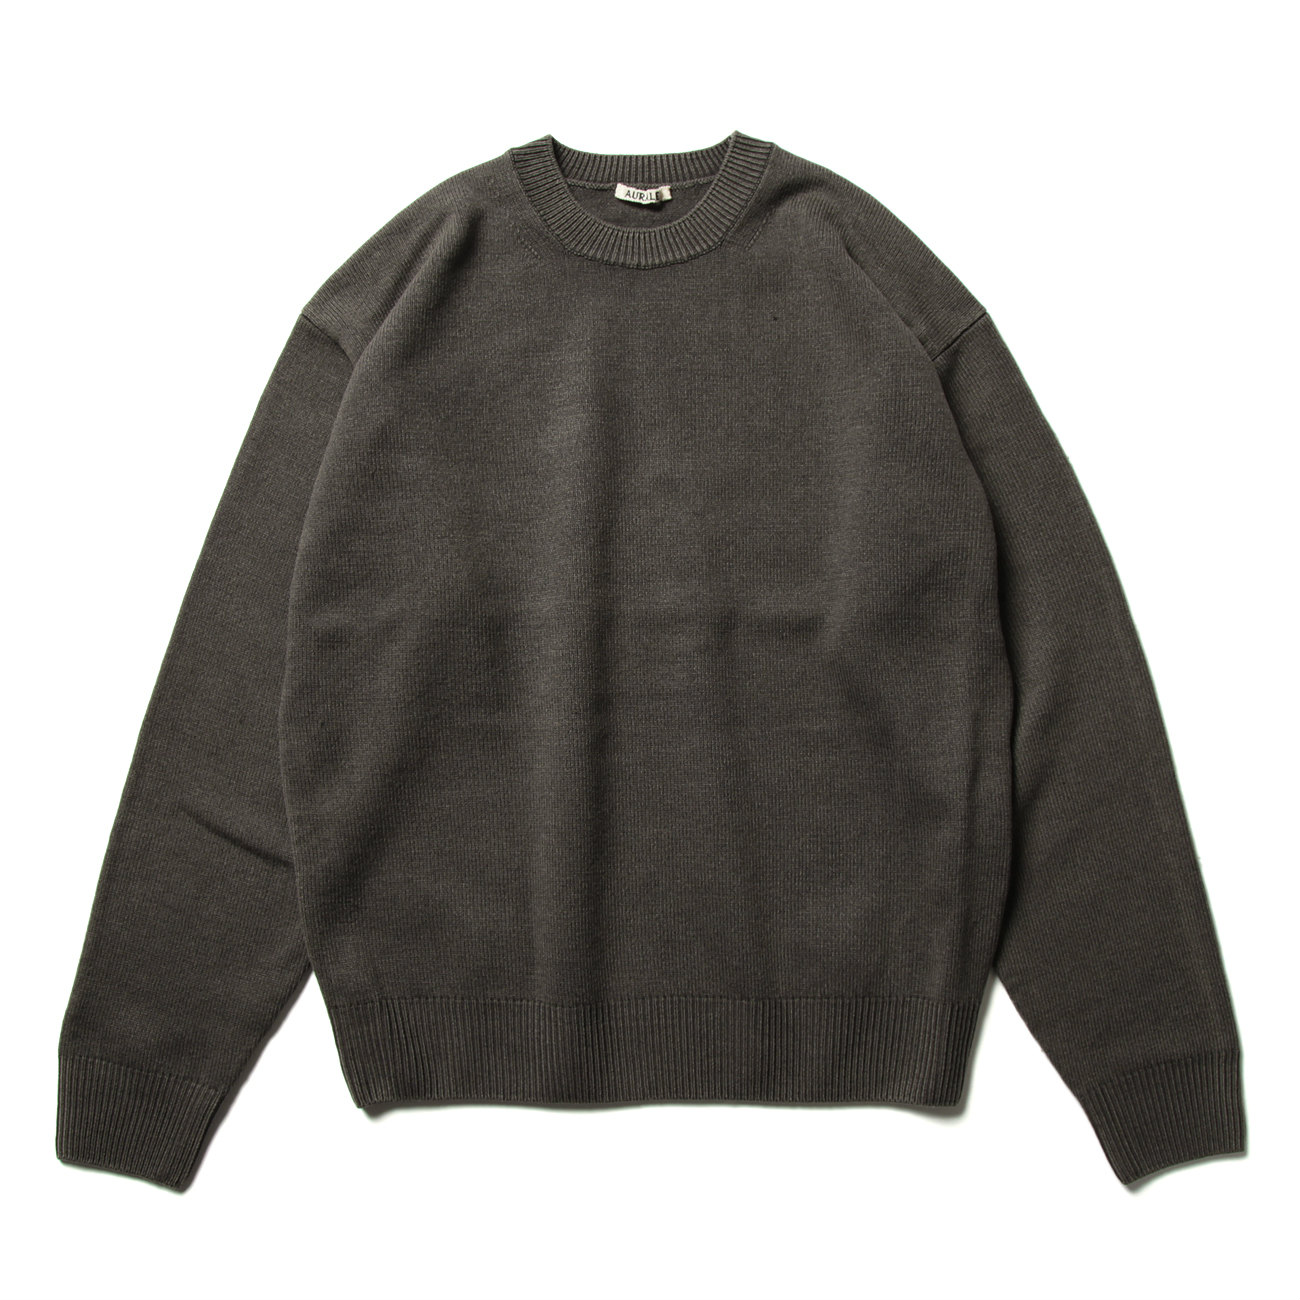 FRENCH MERINO STONE WASHED KNIT P/O (メンズ) - Charcoal Gray